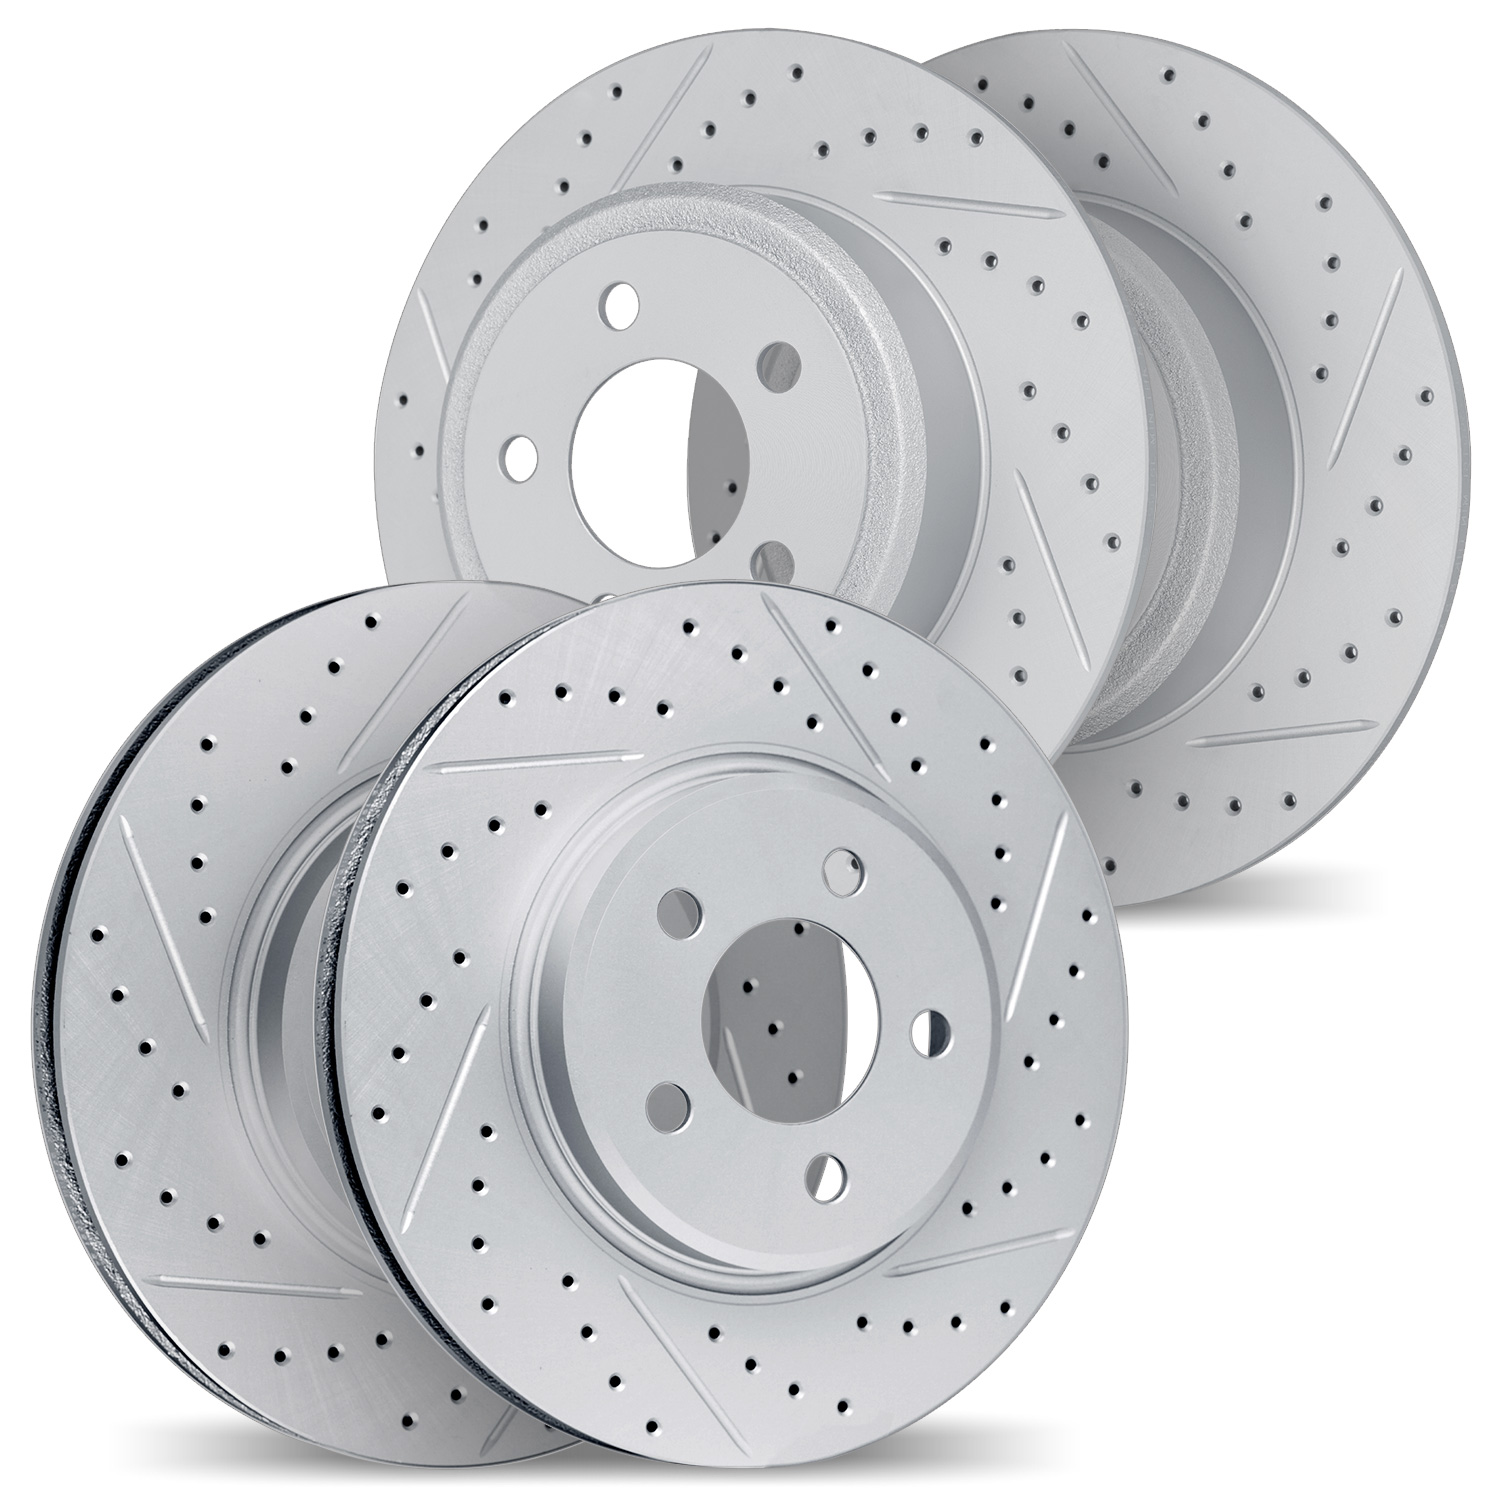 2004-54082 Geoperformance Drilled/Slotted Brake Rotors, 1998-1999 Ford/Lincoln/Mercury/Mazda, Position: Front and Rear